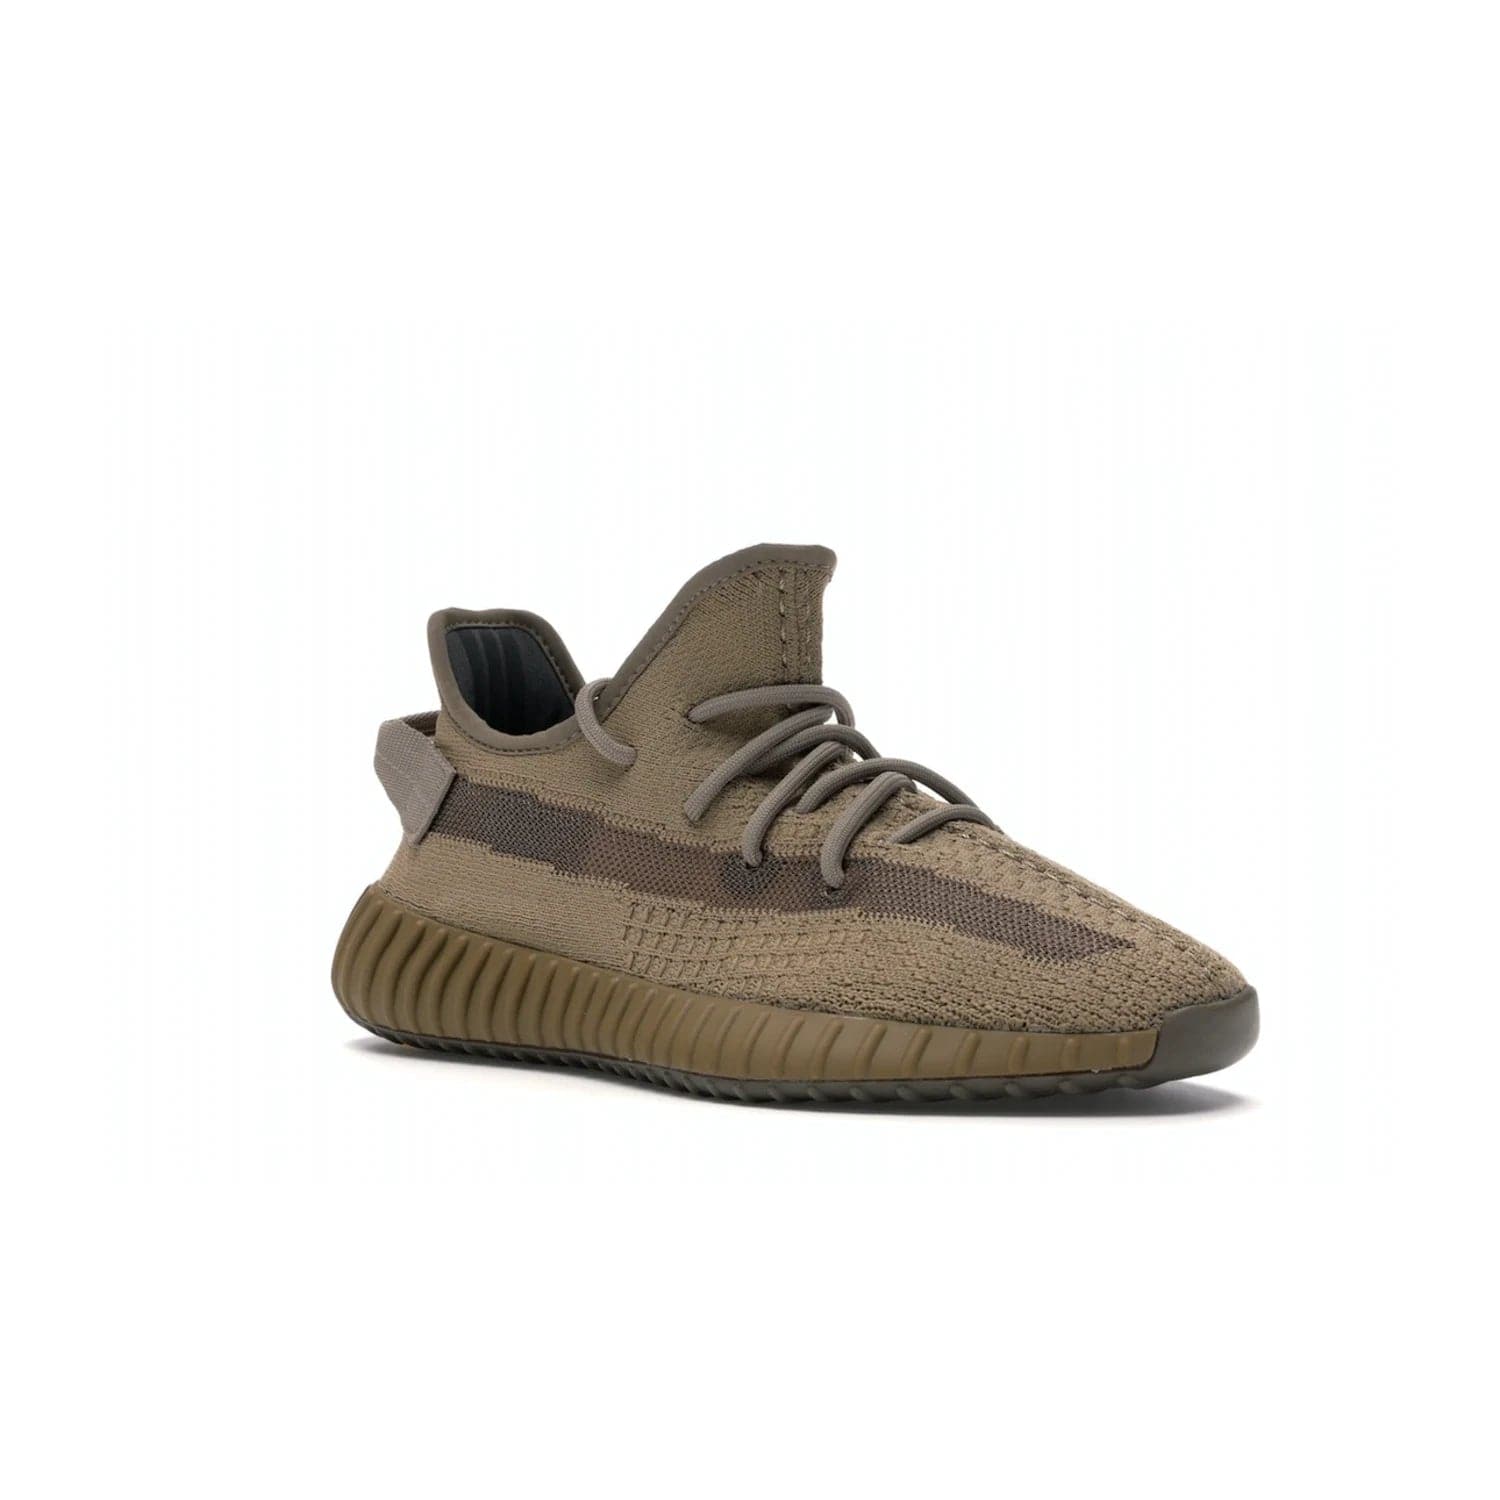 adidas Yeezy Boost 350 V2 Earth - Image 5 - Only at www.BallersClubKickz.com - Abstract style with the adidas Yeezy Boost 350 V2 Earth. Crafted with mud Primeknit upper, mud Boost and interior, and a translucent side stripe. Regional exclusive in Earth/Earth/Earth colorway, these fashionable sneakers released in February 2020. Showcase your style with the Yeezy 350 V2 Earth.